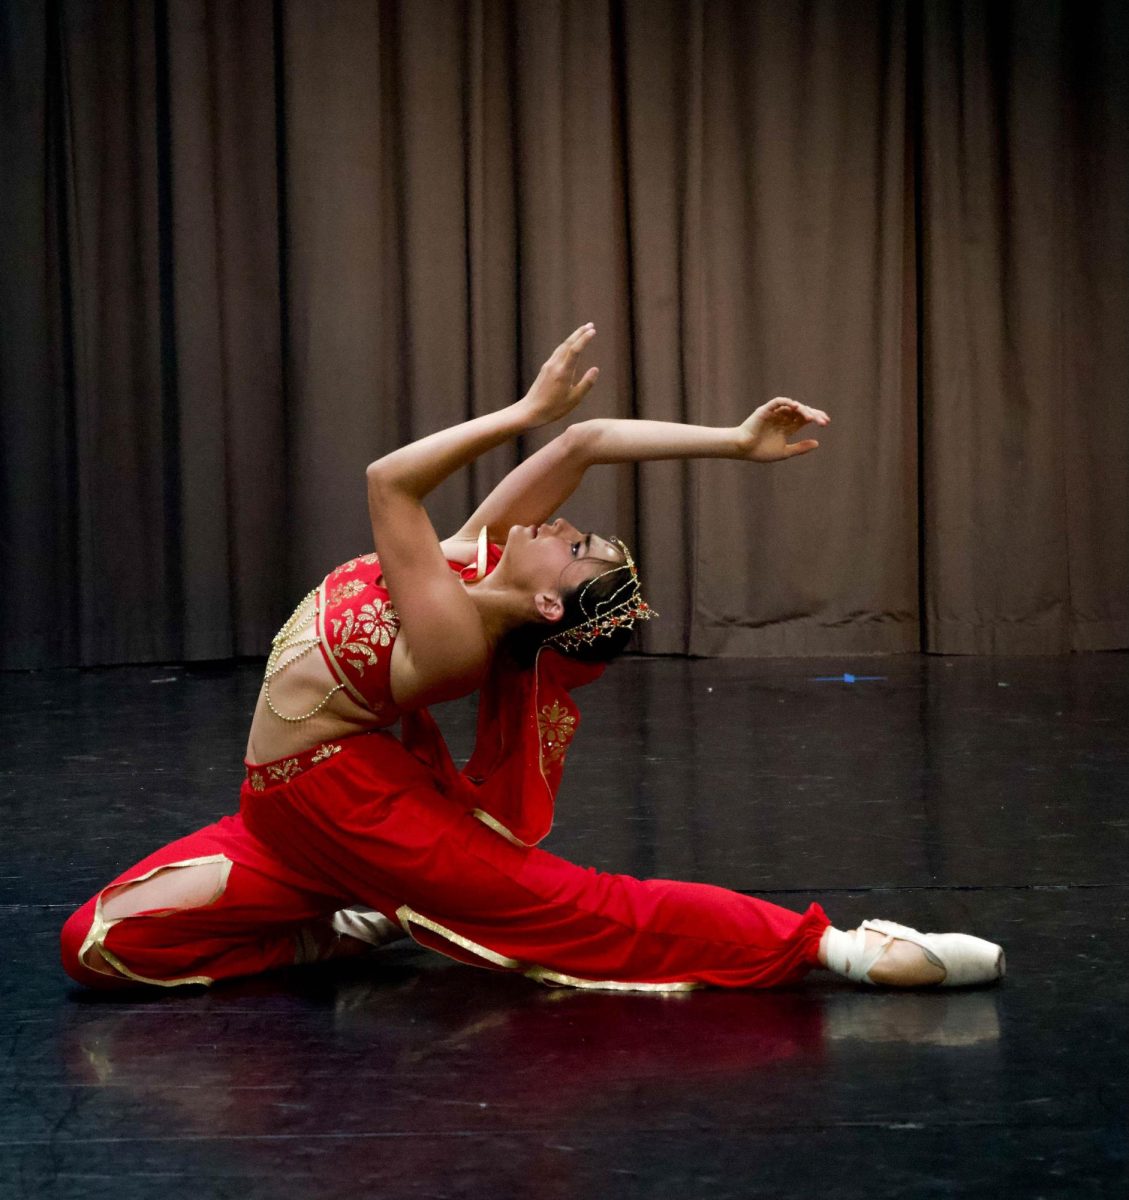  Tatum Bolton (12) performs the principal role of Indian temple dancer Nikiya in San Clemente Dance’s production of the ballet, La Bayadère, during her sophomore year. The ballet centers around the tragic love story of Nikiya and warrior Solor in ancient India.